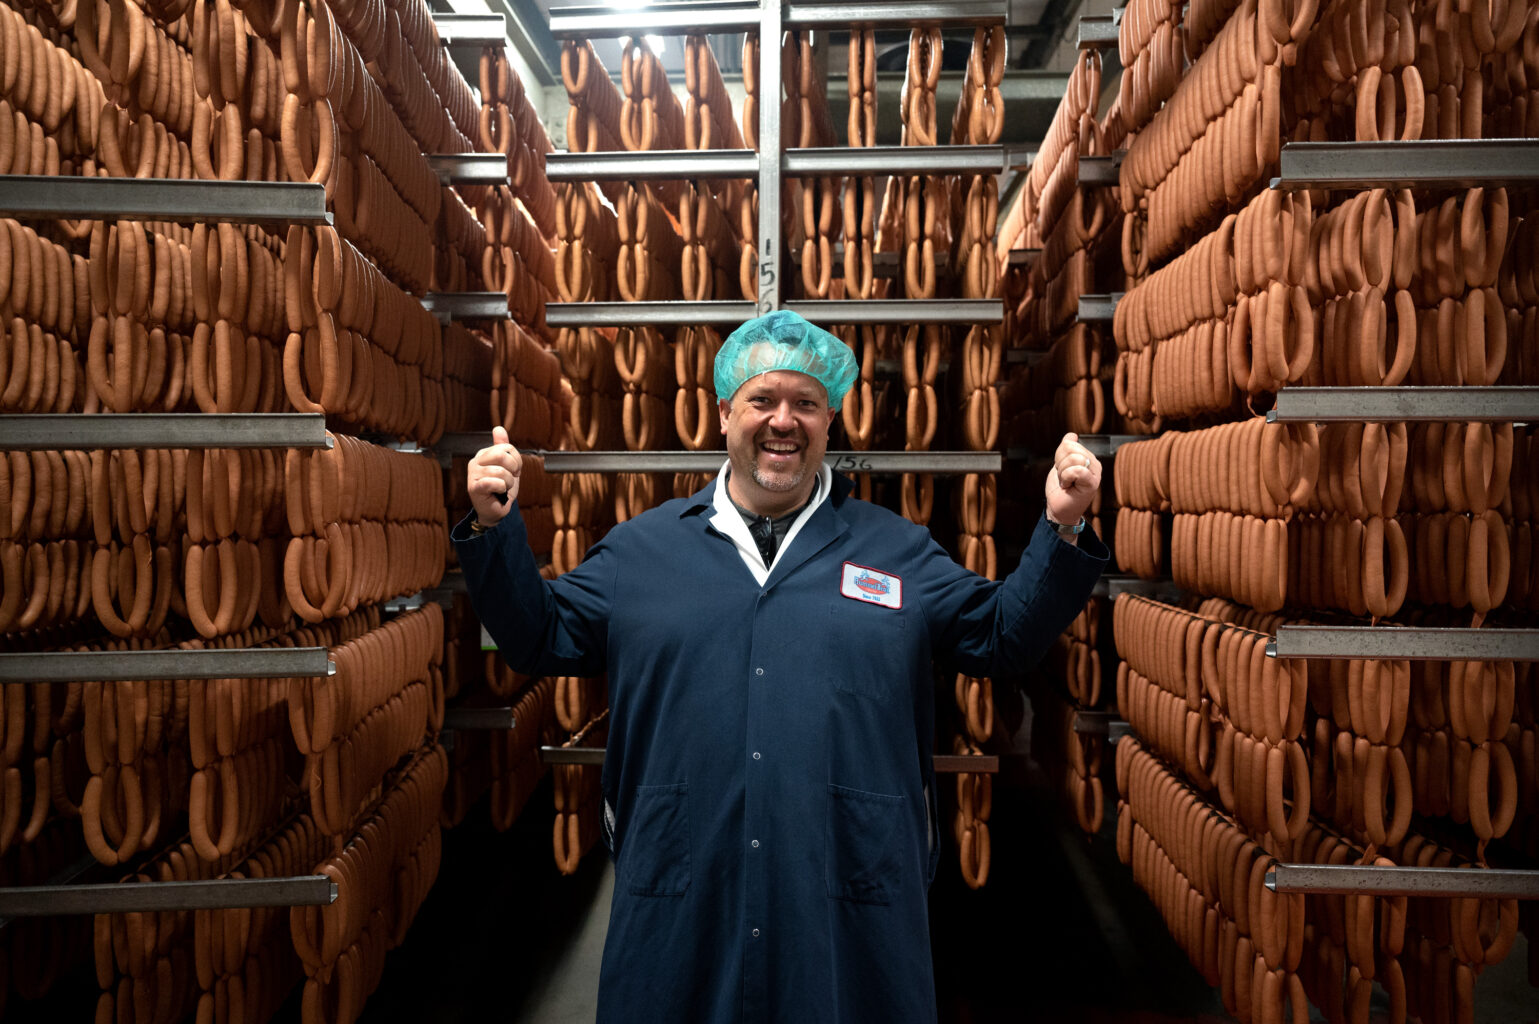 “Seasoned” host Chef Plum stands for a portrait in front of racks of cooling hot dogs at the Hummel Bros. factory in New Haven, Conn.  